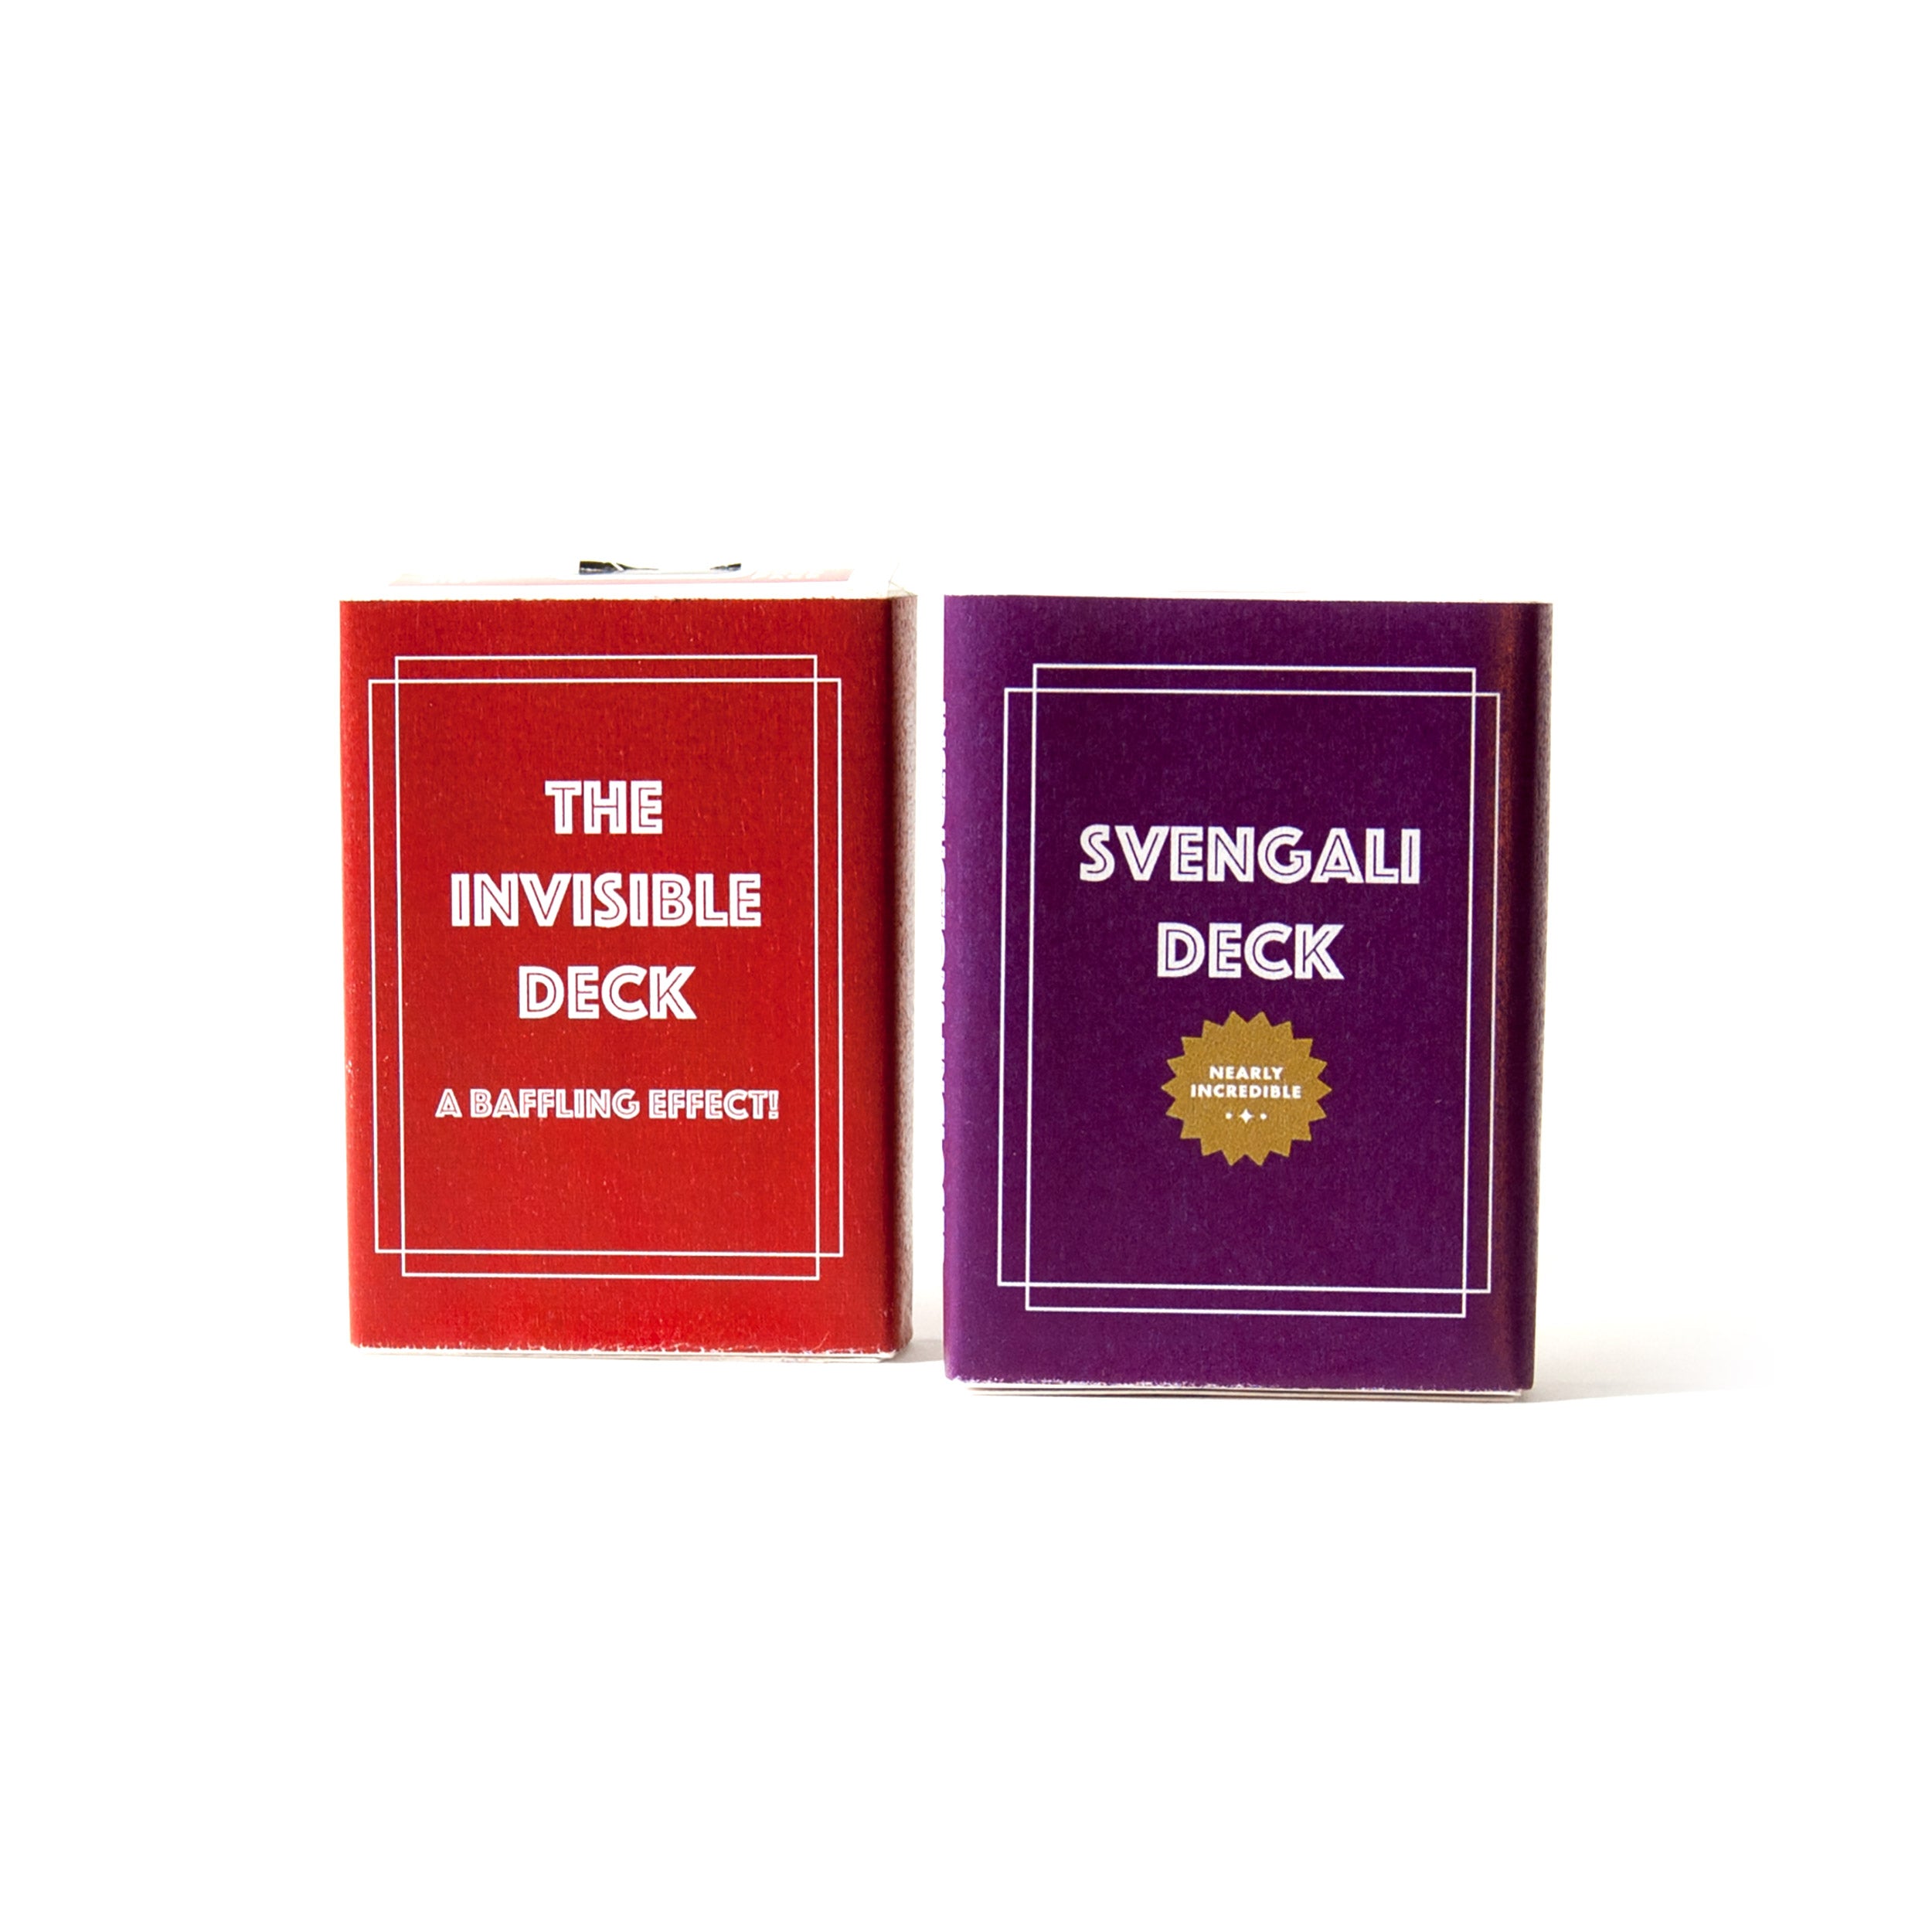 Front cover: The Invisible Deck: A Baffling Effect! Back cover: An "invisible" deck is offered to the spectator to choose a card and replace it back in the deck upside down. The magi then produces this deck with the chosen card presented upside down in the real deck. VOILA!"